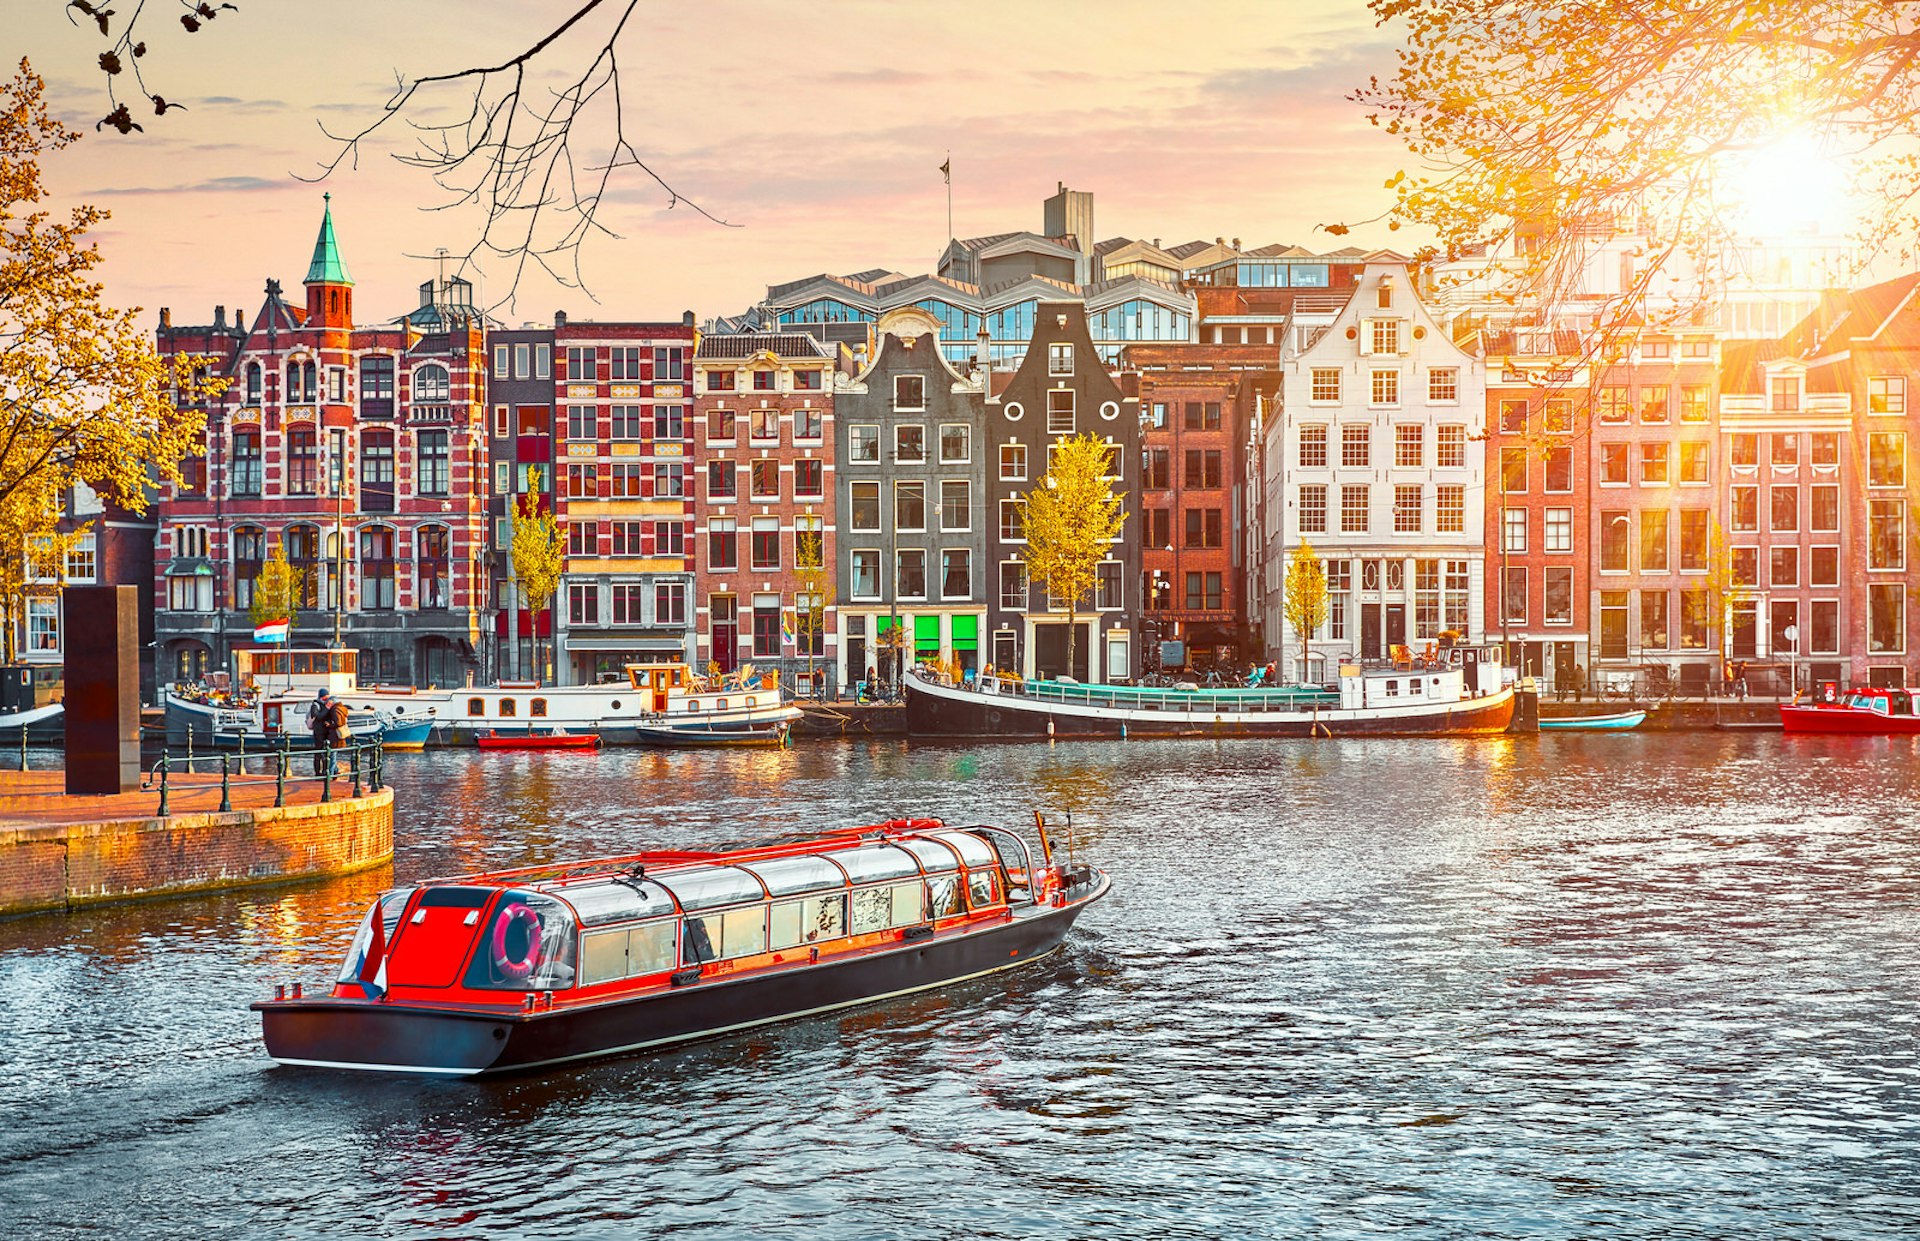 A pleasure boat navigating a waterway in Amsterdam, a key Killing Eve season two location; the canal is lined with colourful medieval houses and boats.